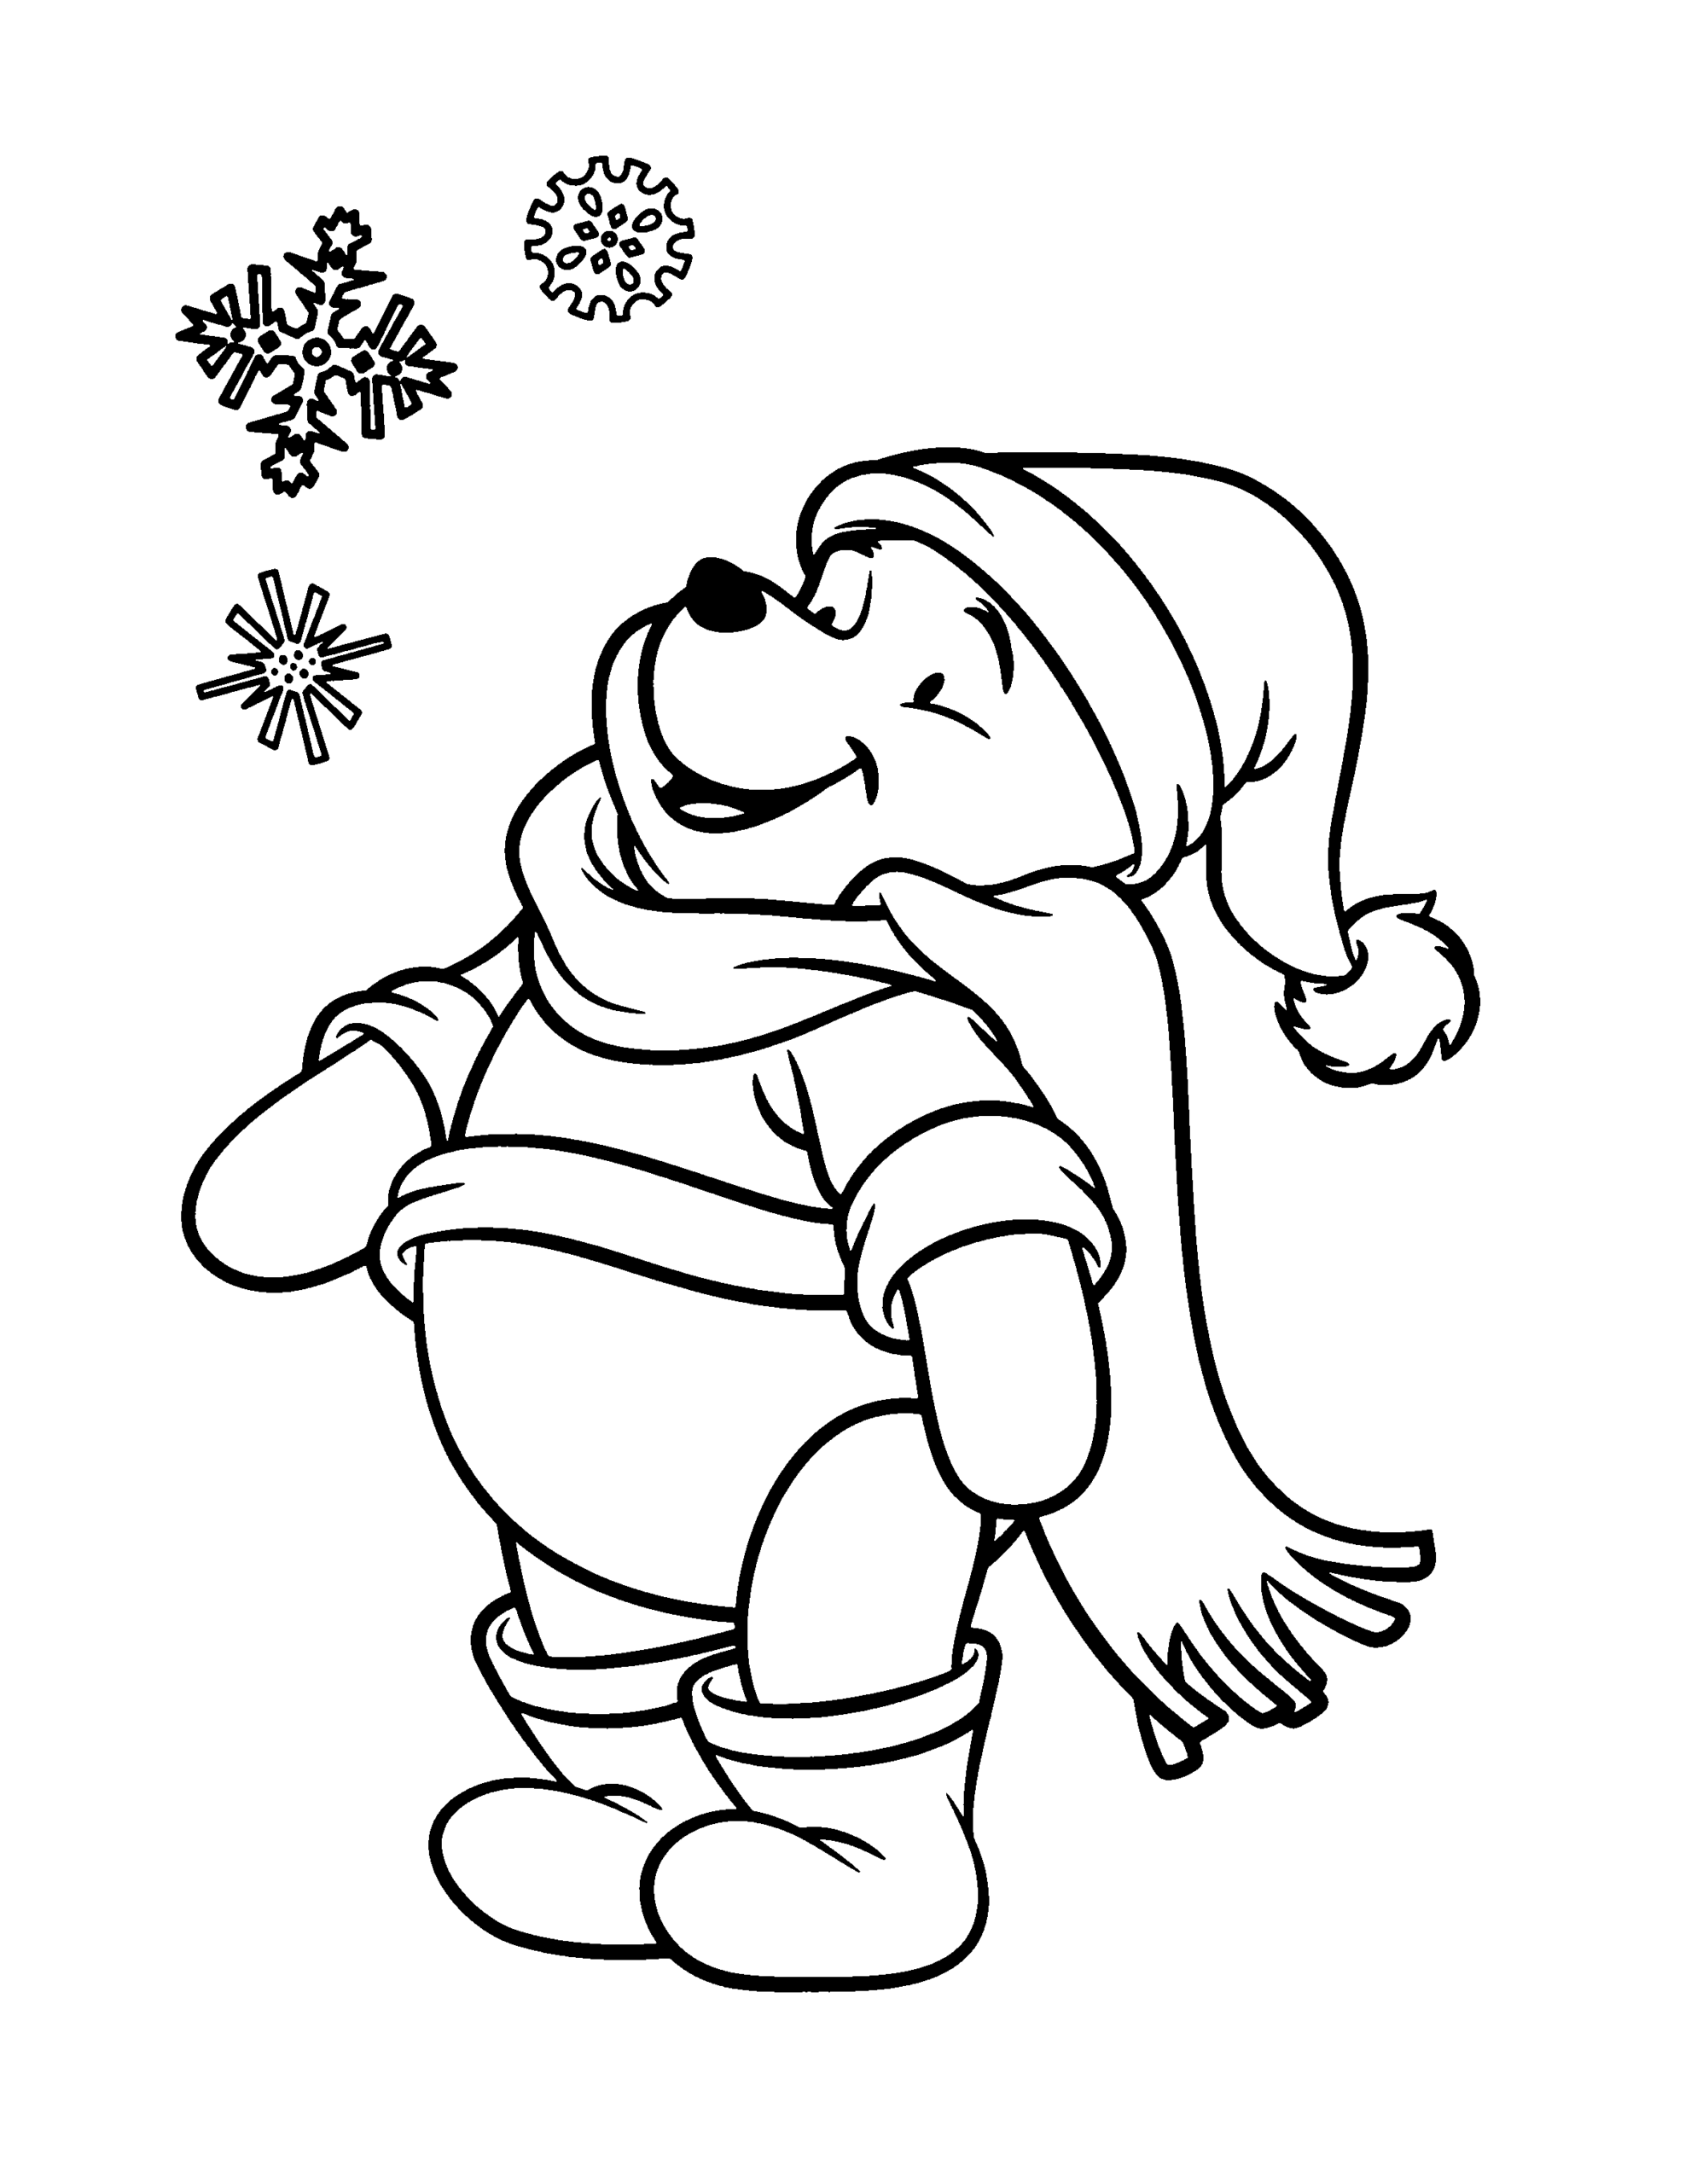 Winnie the Pooh Coloring Pages Cartoons winnie the pooh 76 Printable 2020 7195 Coloring4free